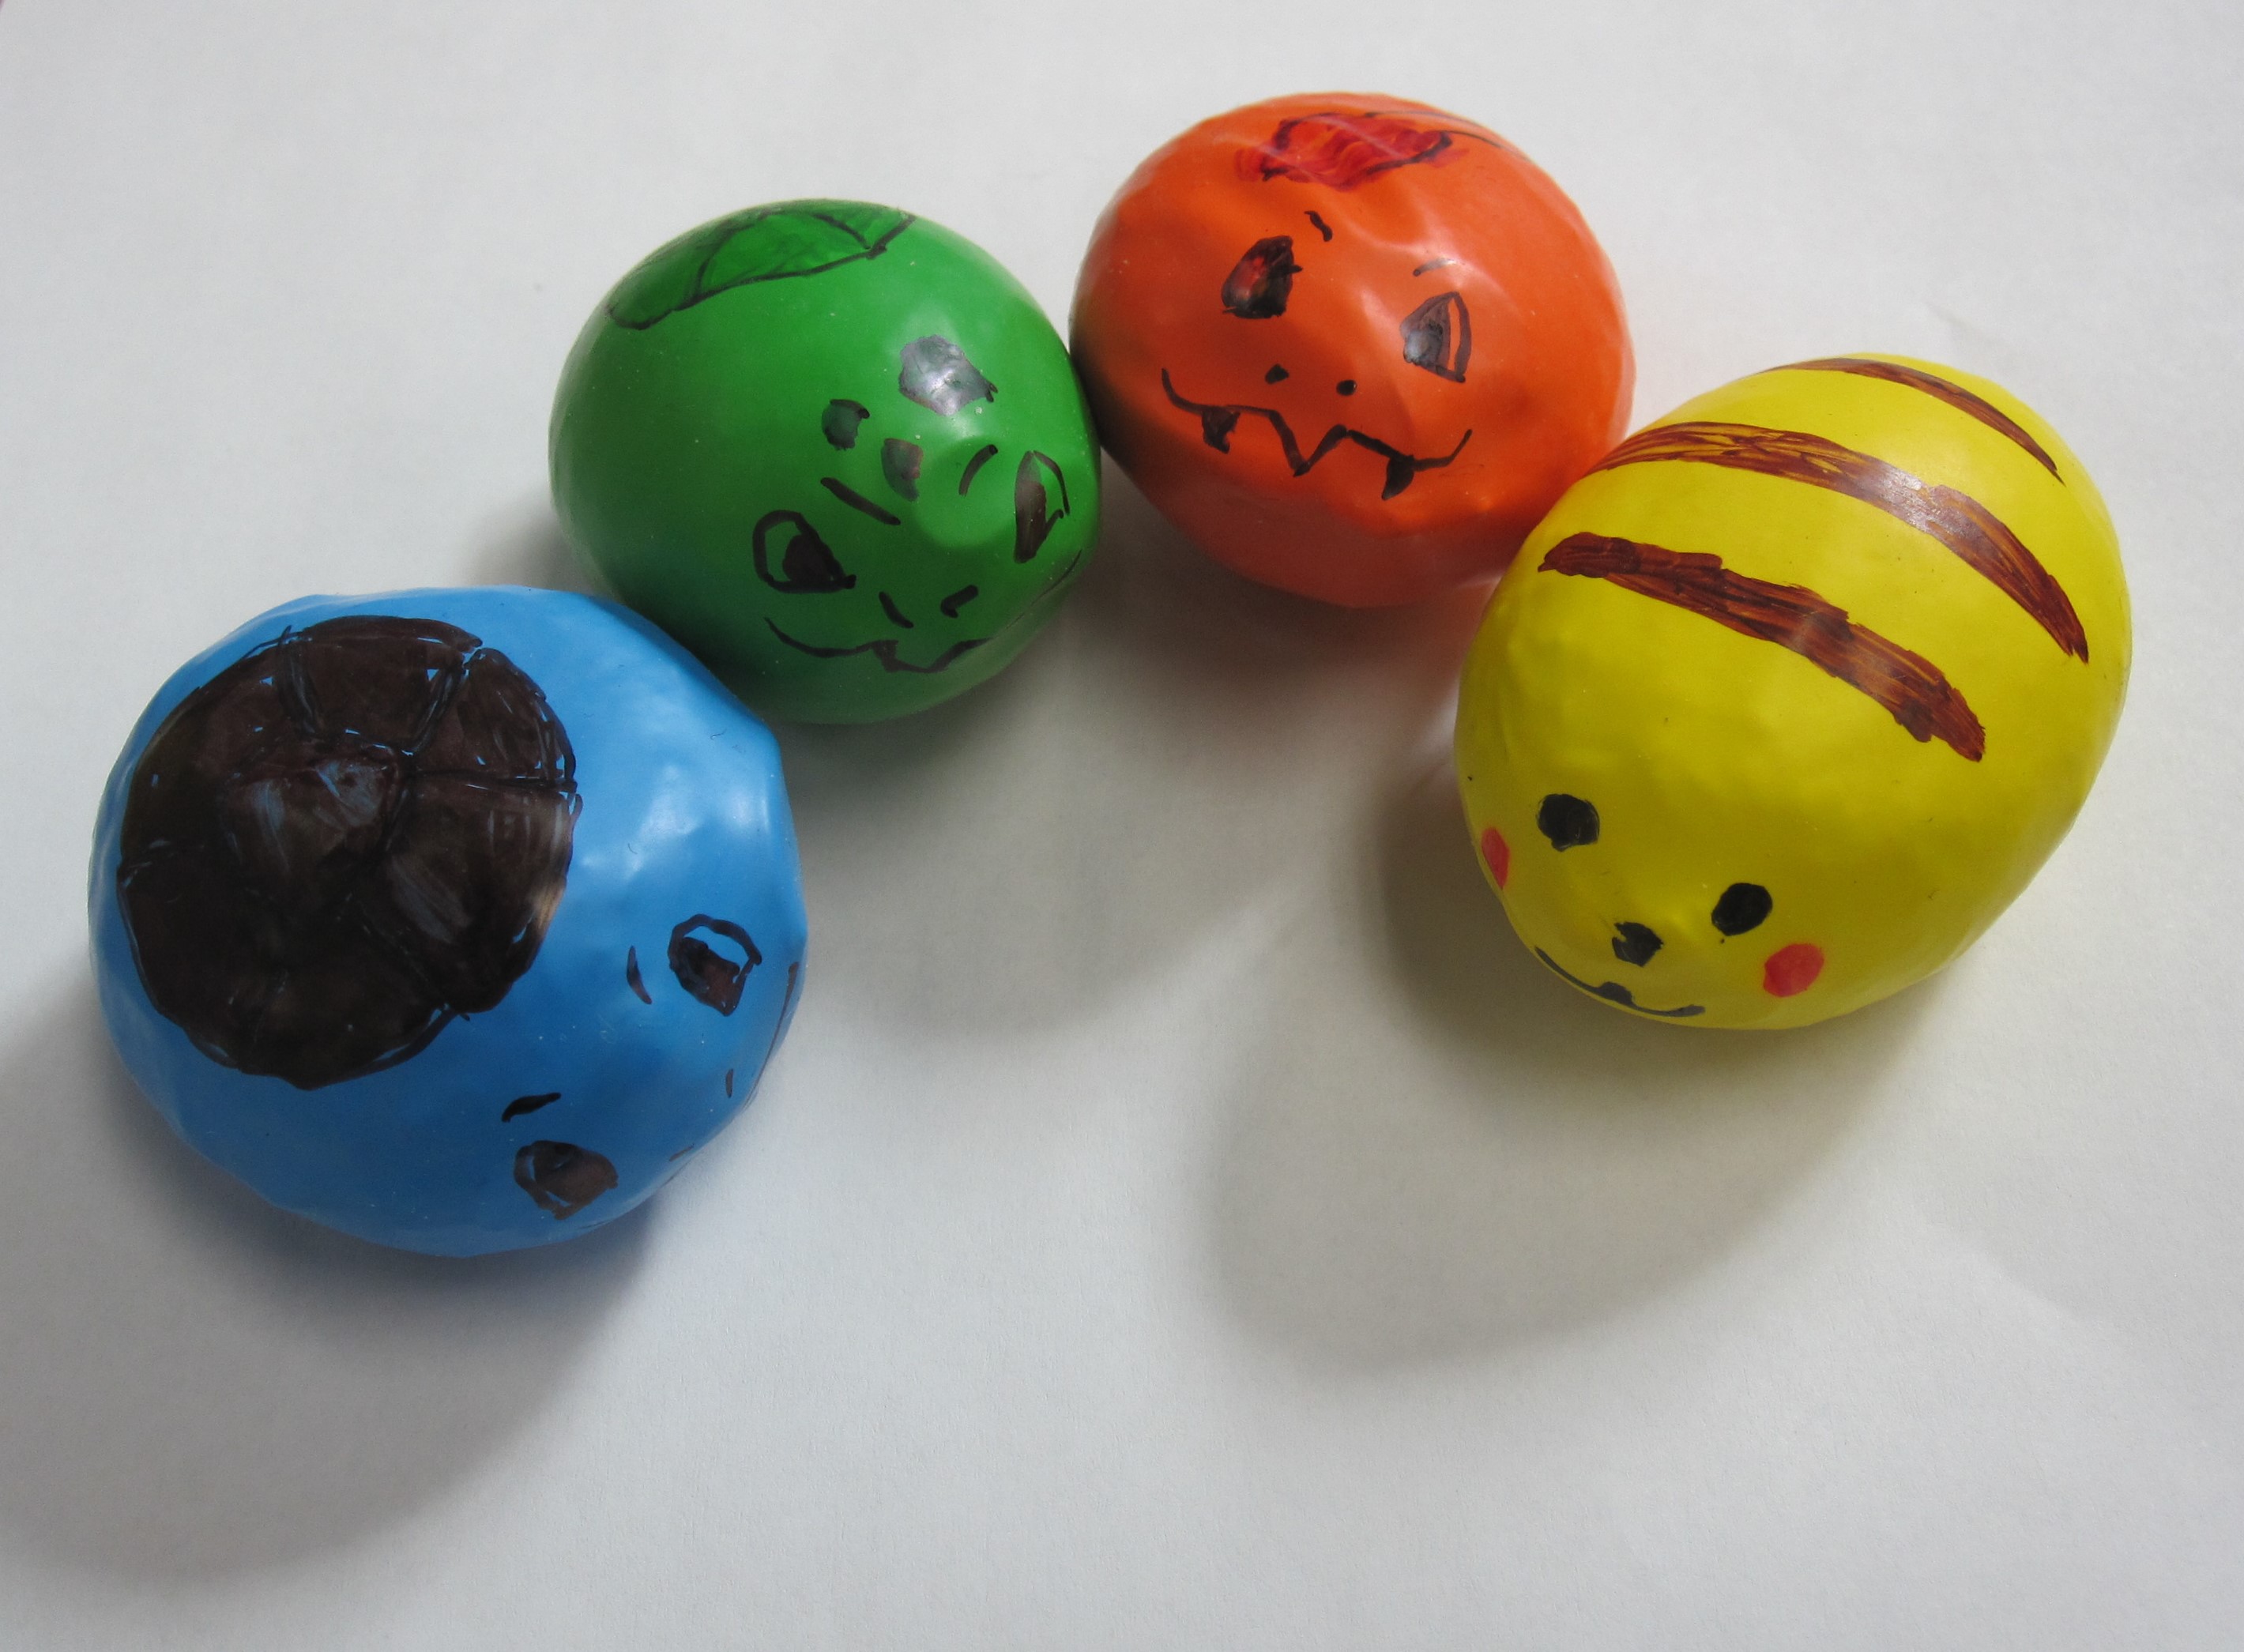 blue, green, orange, and yellow stress balls with drawn faces